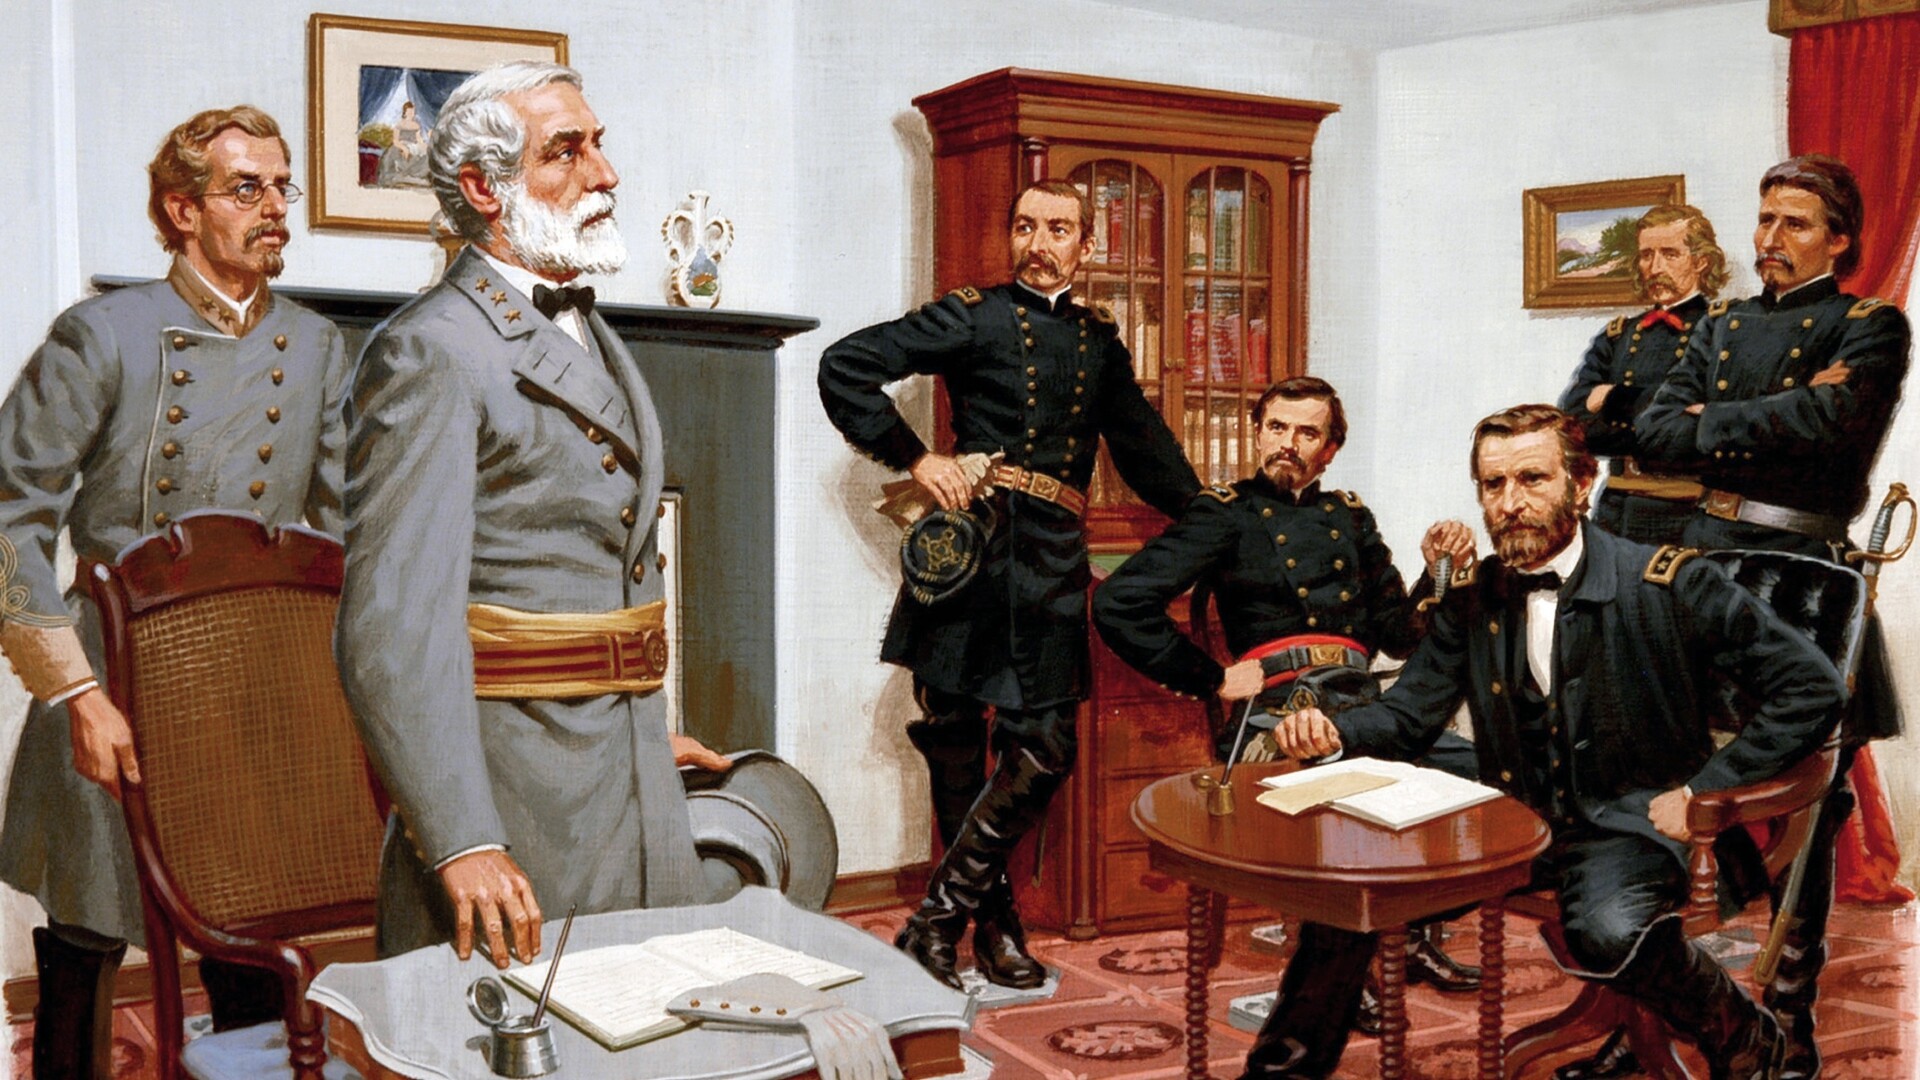 General Lee (Robert Edward): Conclusion of the American Civil War, 1865, Surrender, Union’s Ulysses S. Grant, Appomattox Court House. 1920x1080 Full HD Wallpaper.